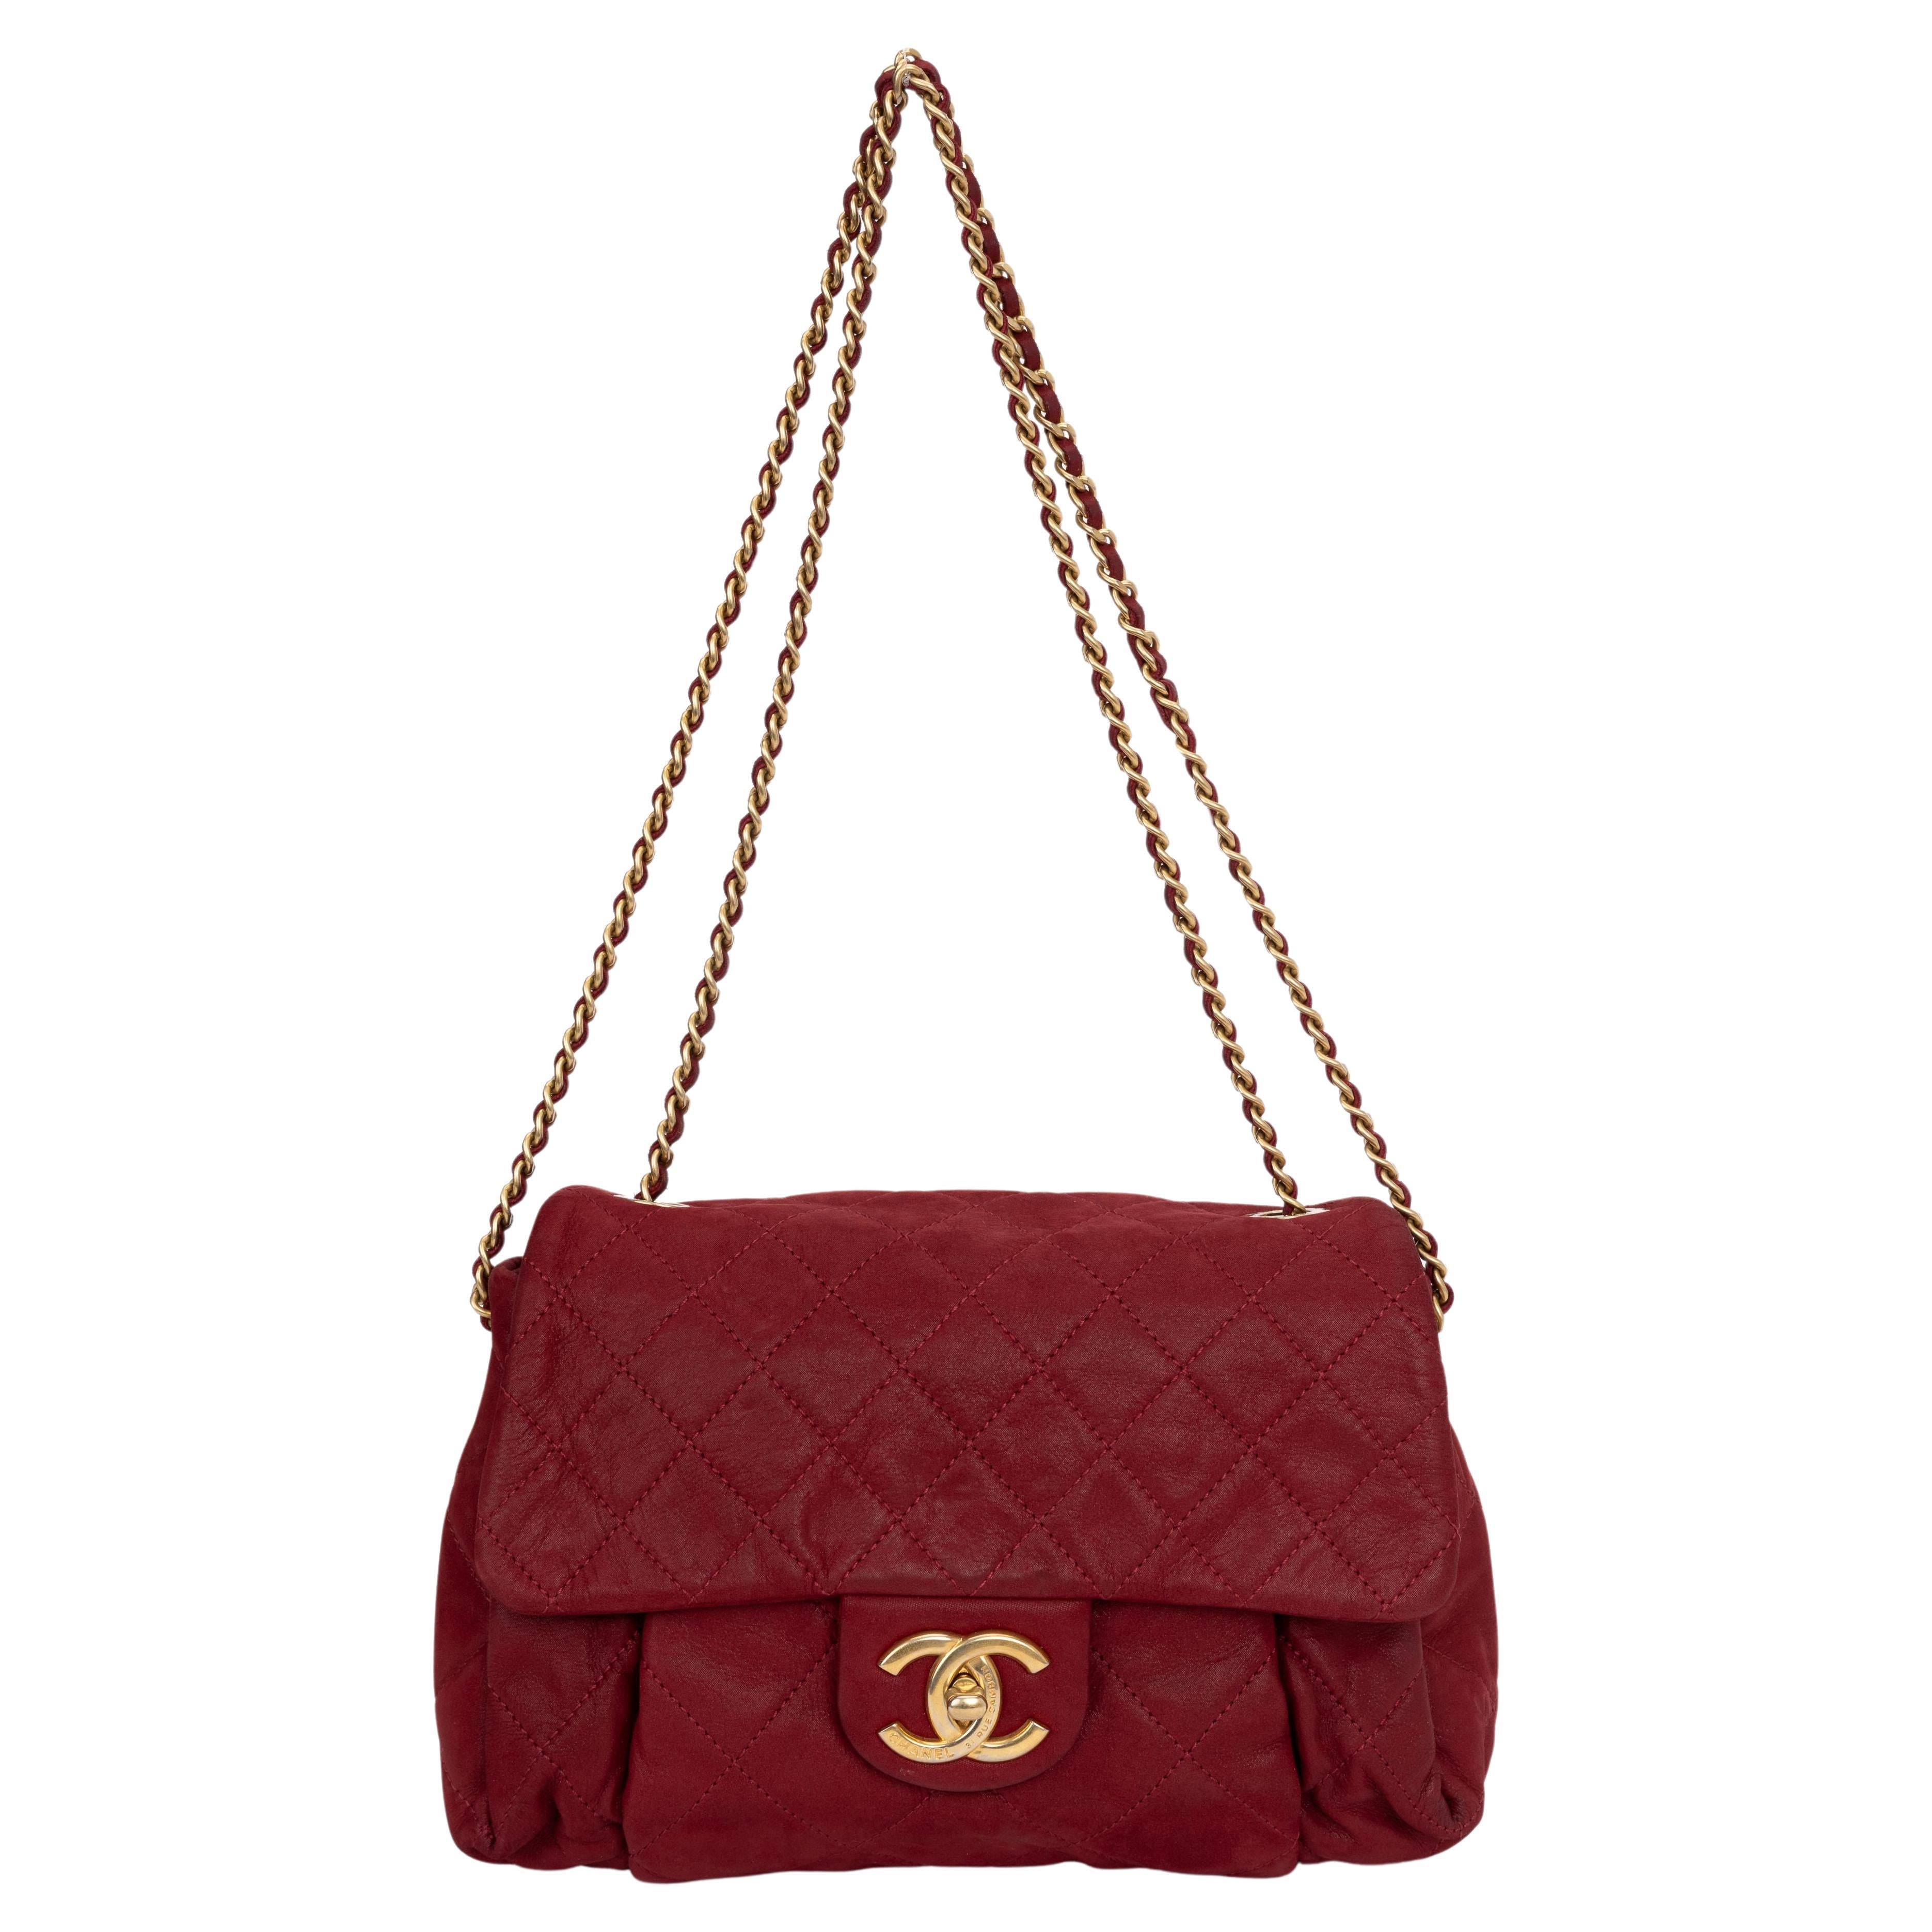 Chanel Medium Quilted Red Flap Bag